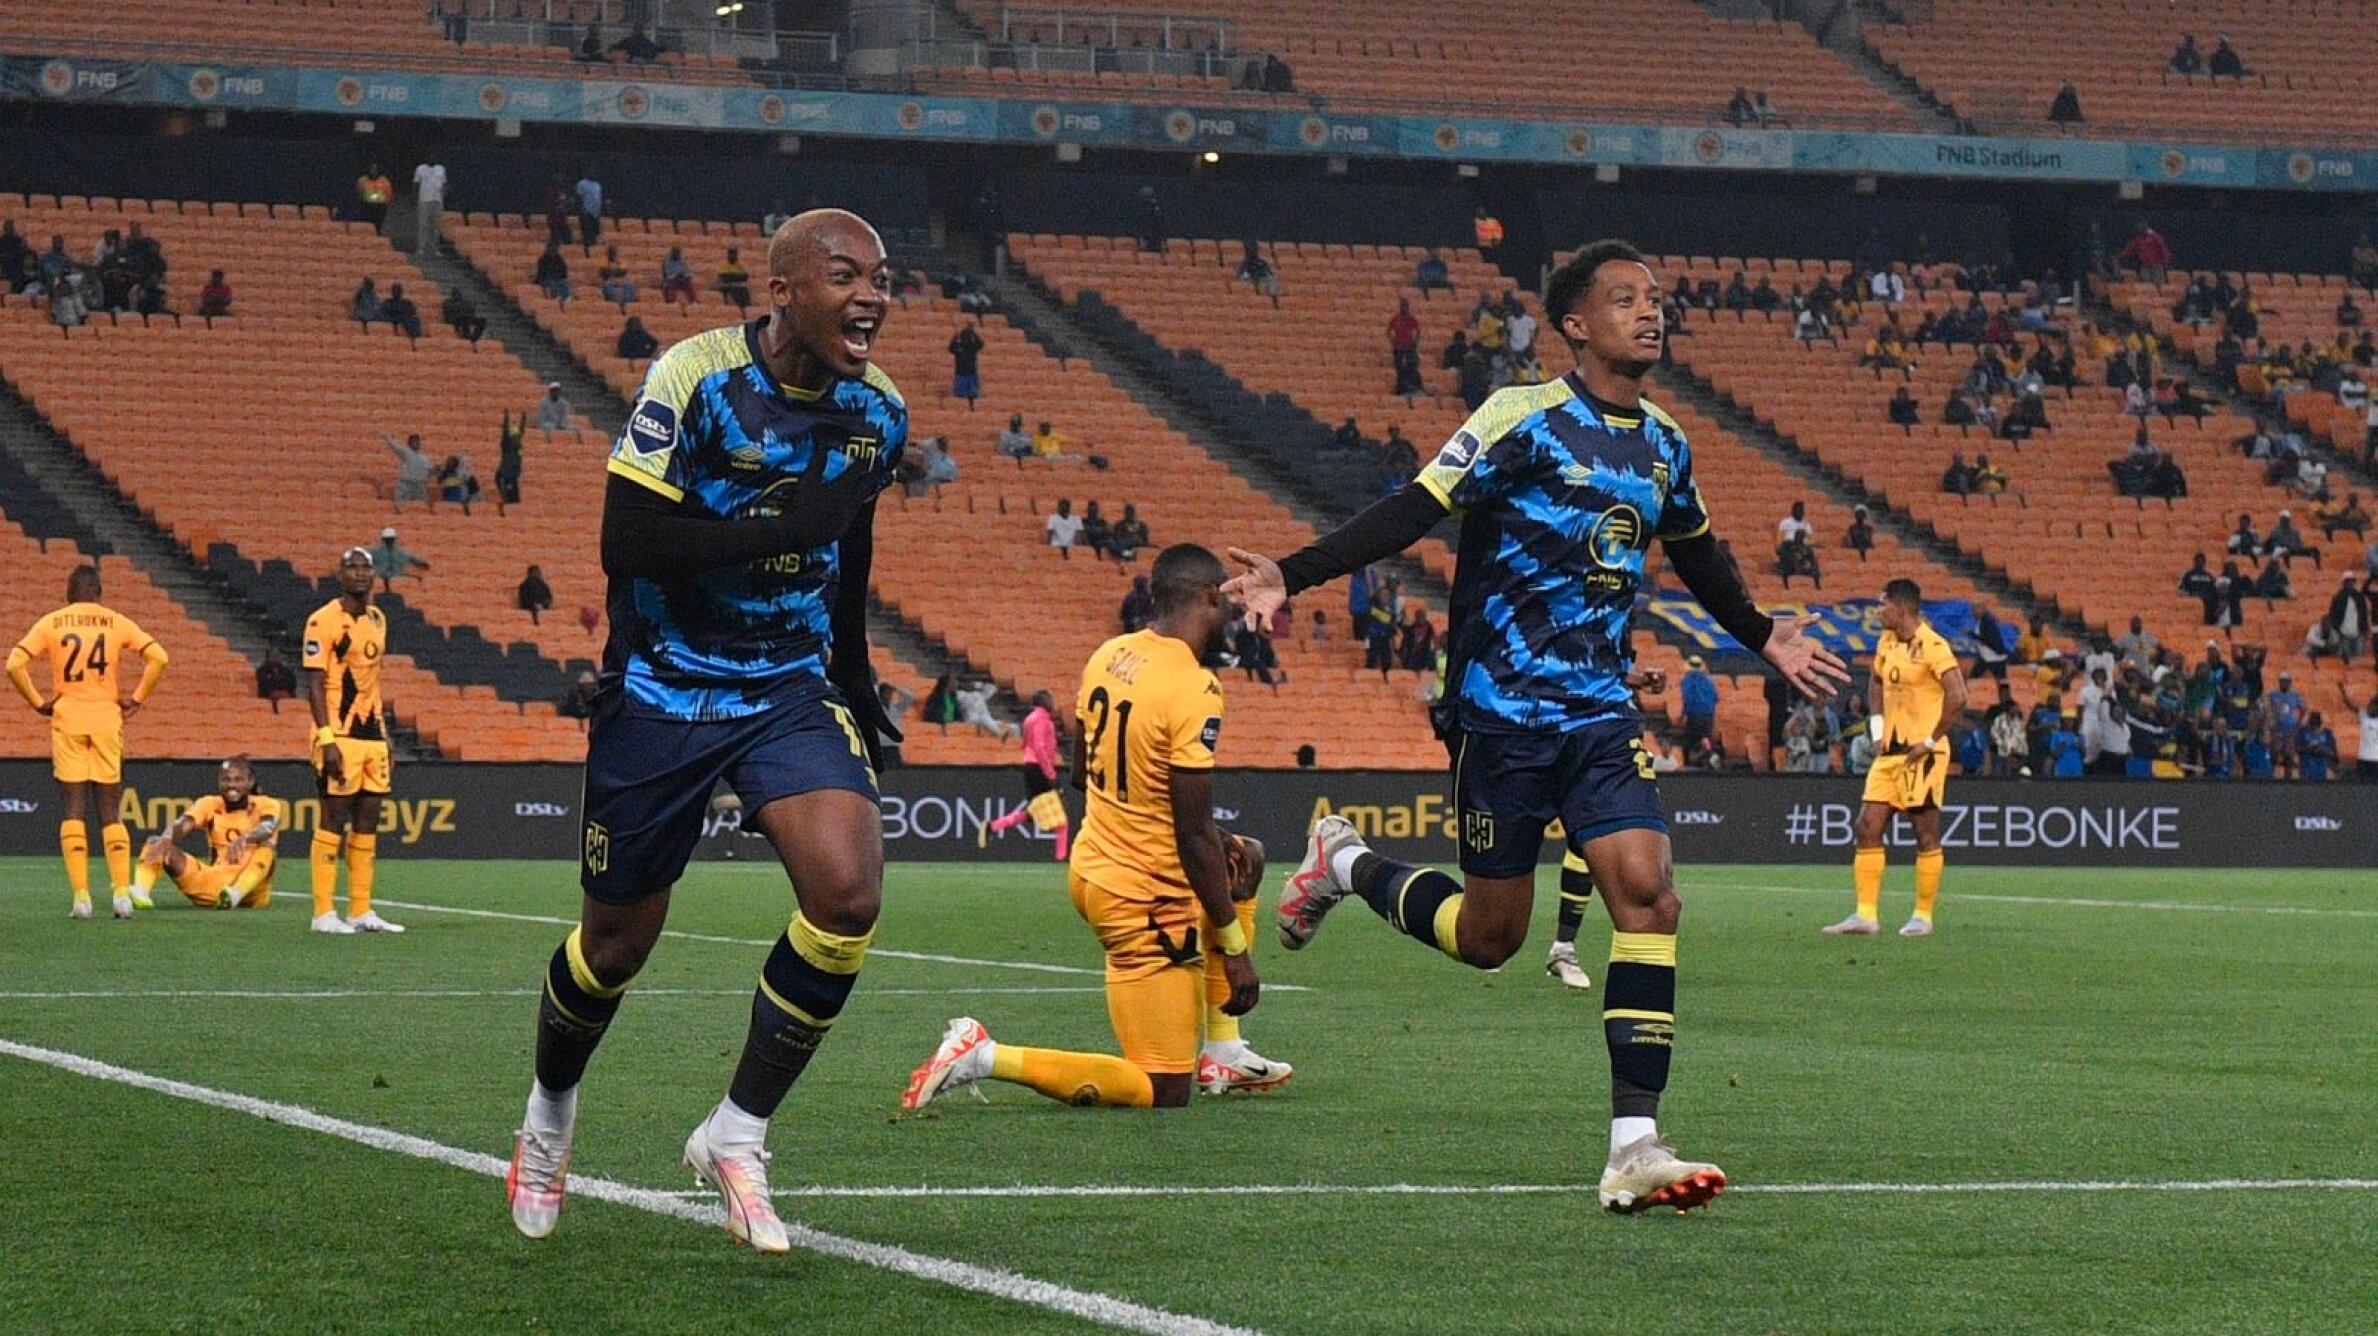 Cape Town City’s Khanyisa Mayo celebrates after scoring a goal during their DStv Premiership match against Kaizer Chiefs at FNB Stadium